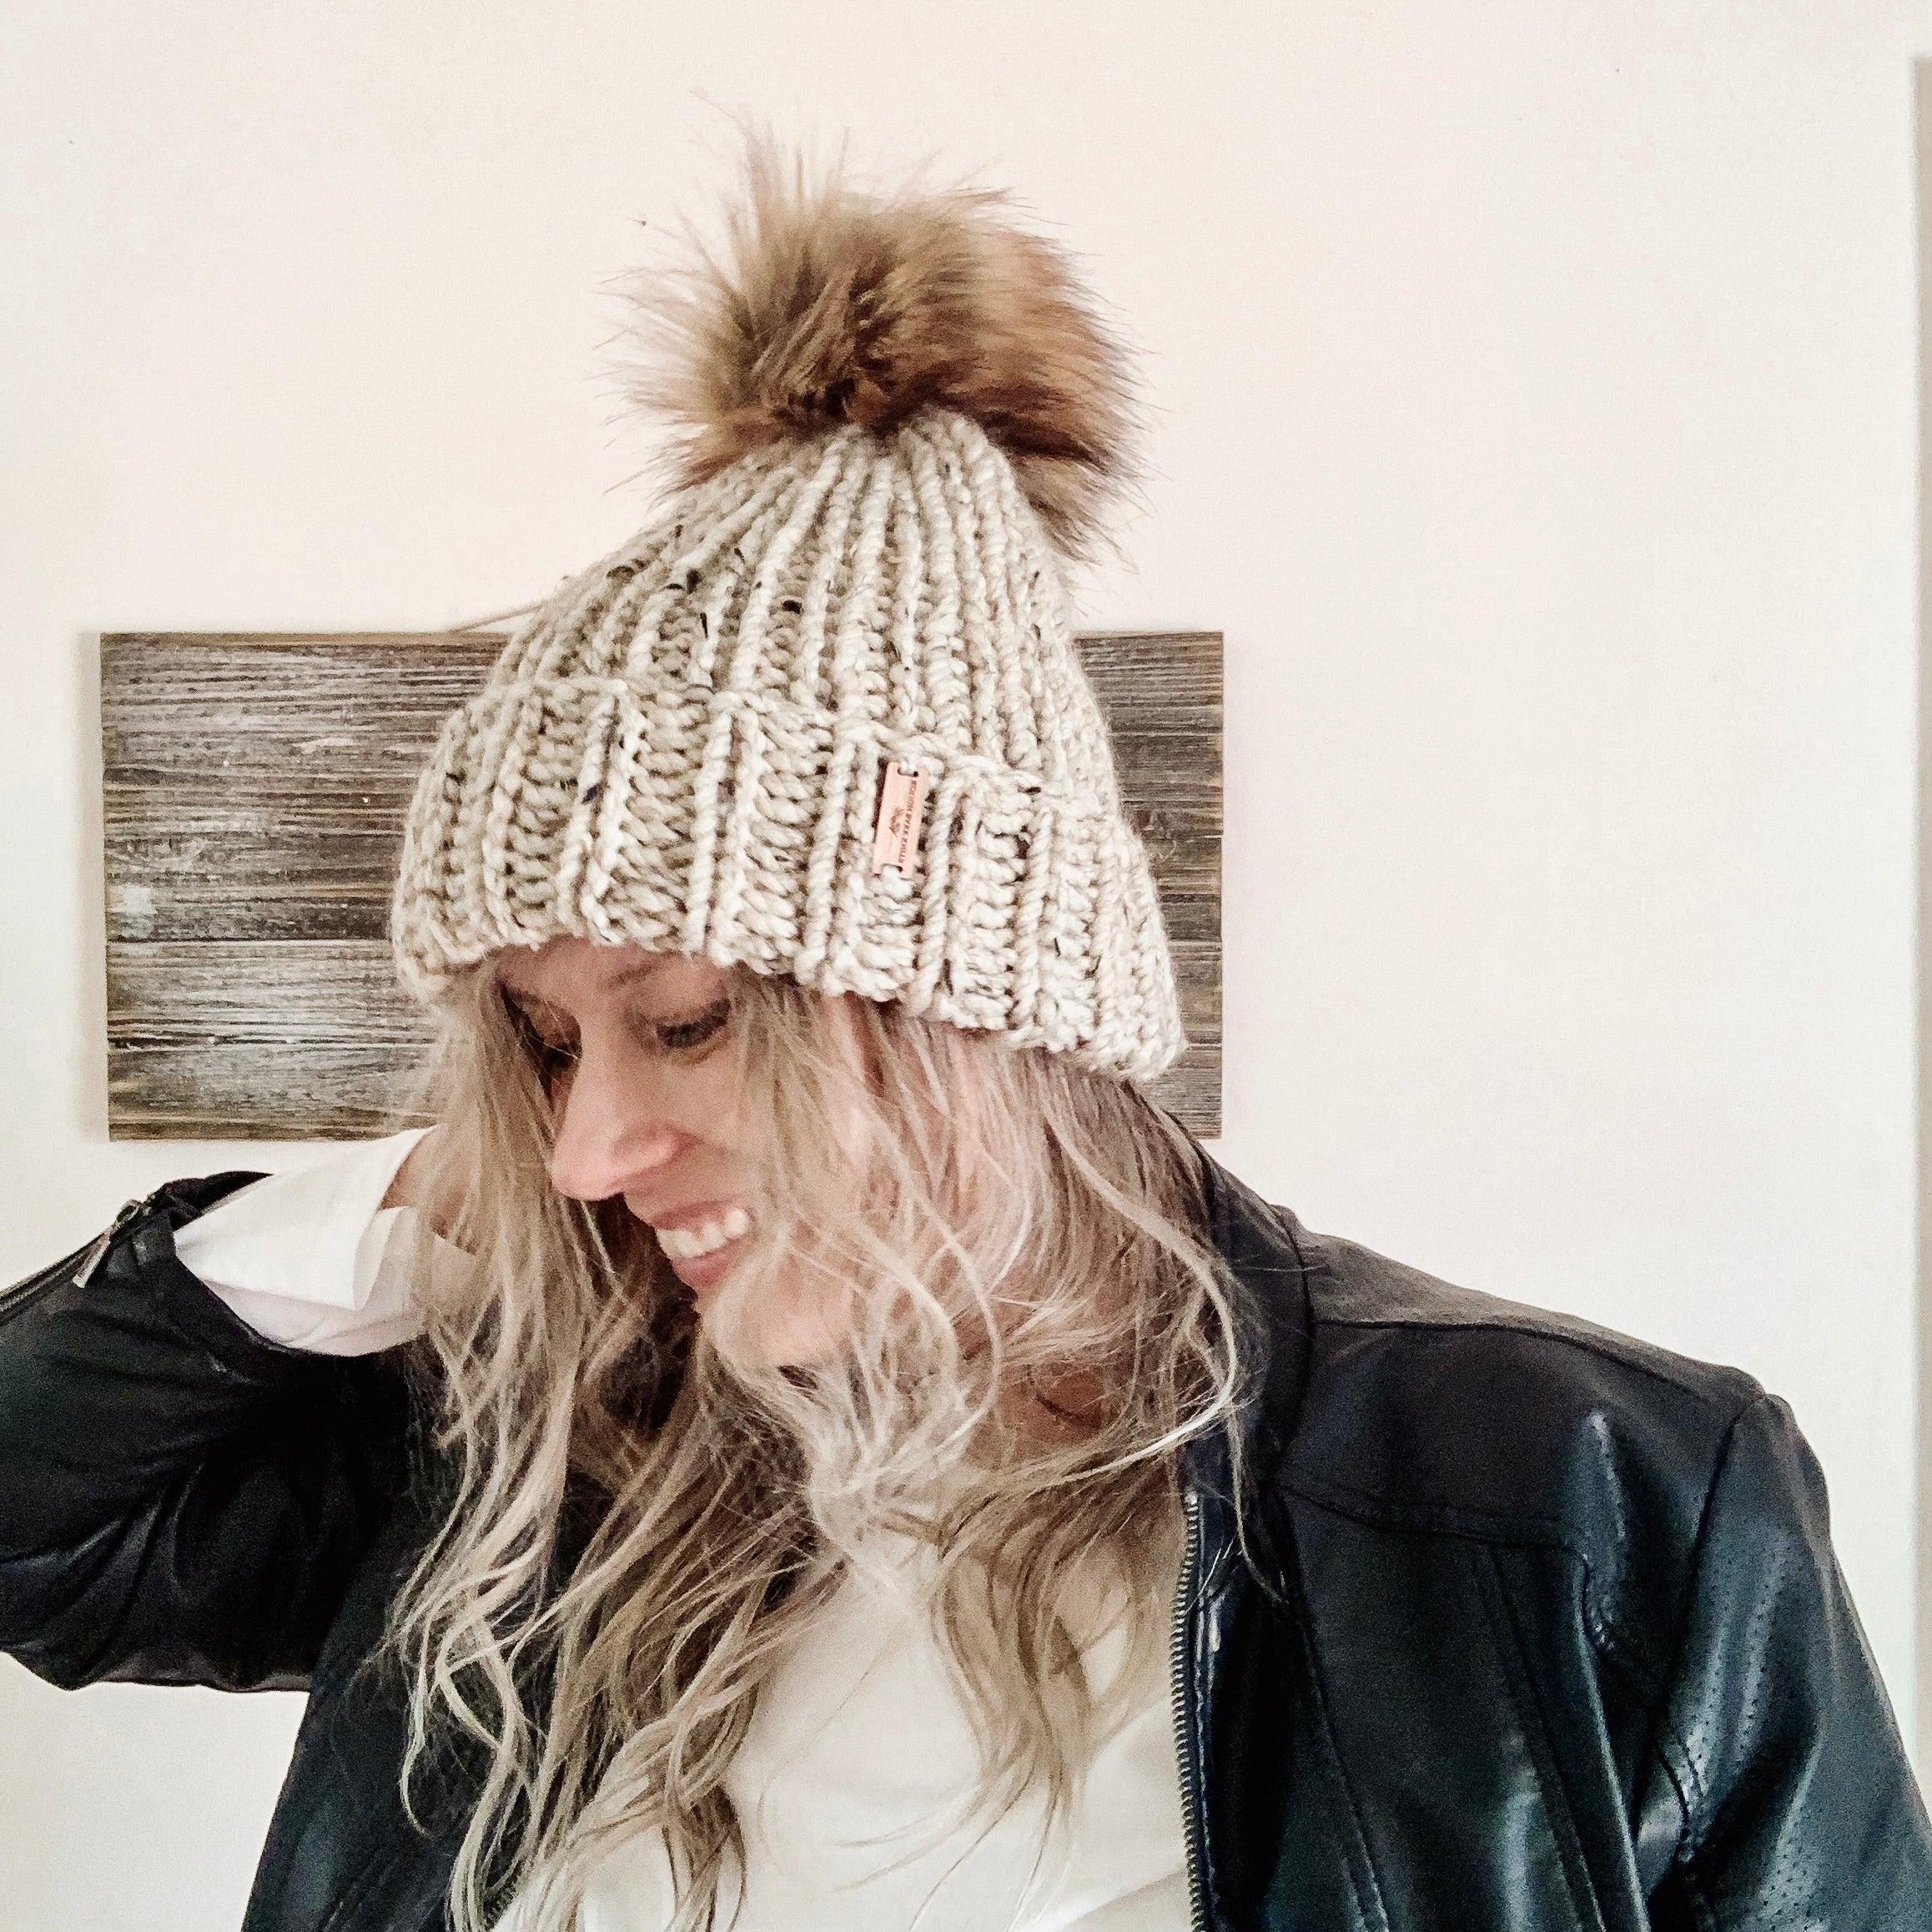 Chunky Knits: Cozy Hats, Scarves and More Made Simple with Extra-Large Yarn  – Sommer Street's Macmillan Store